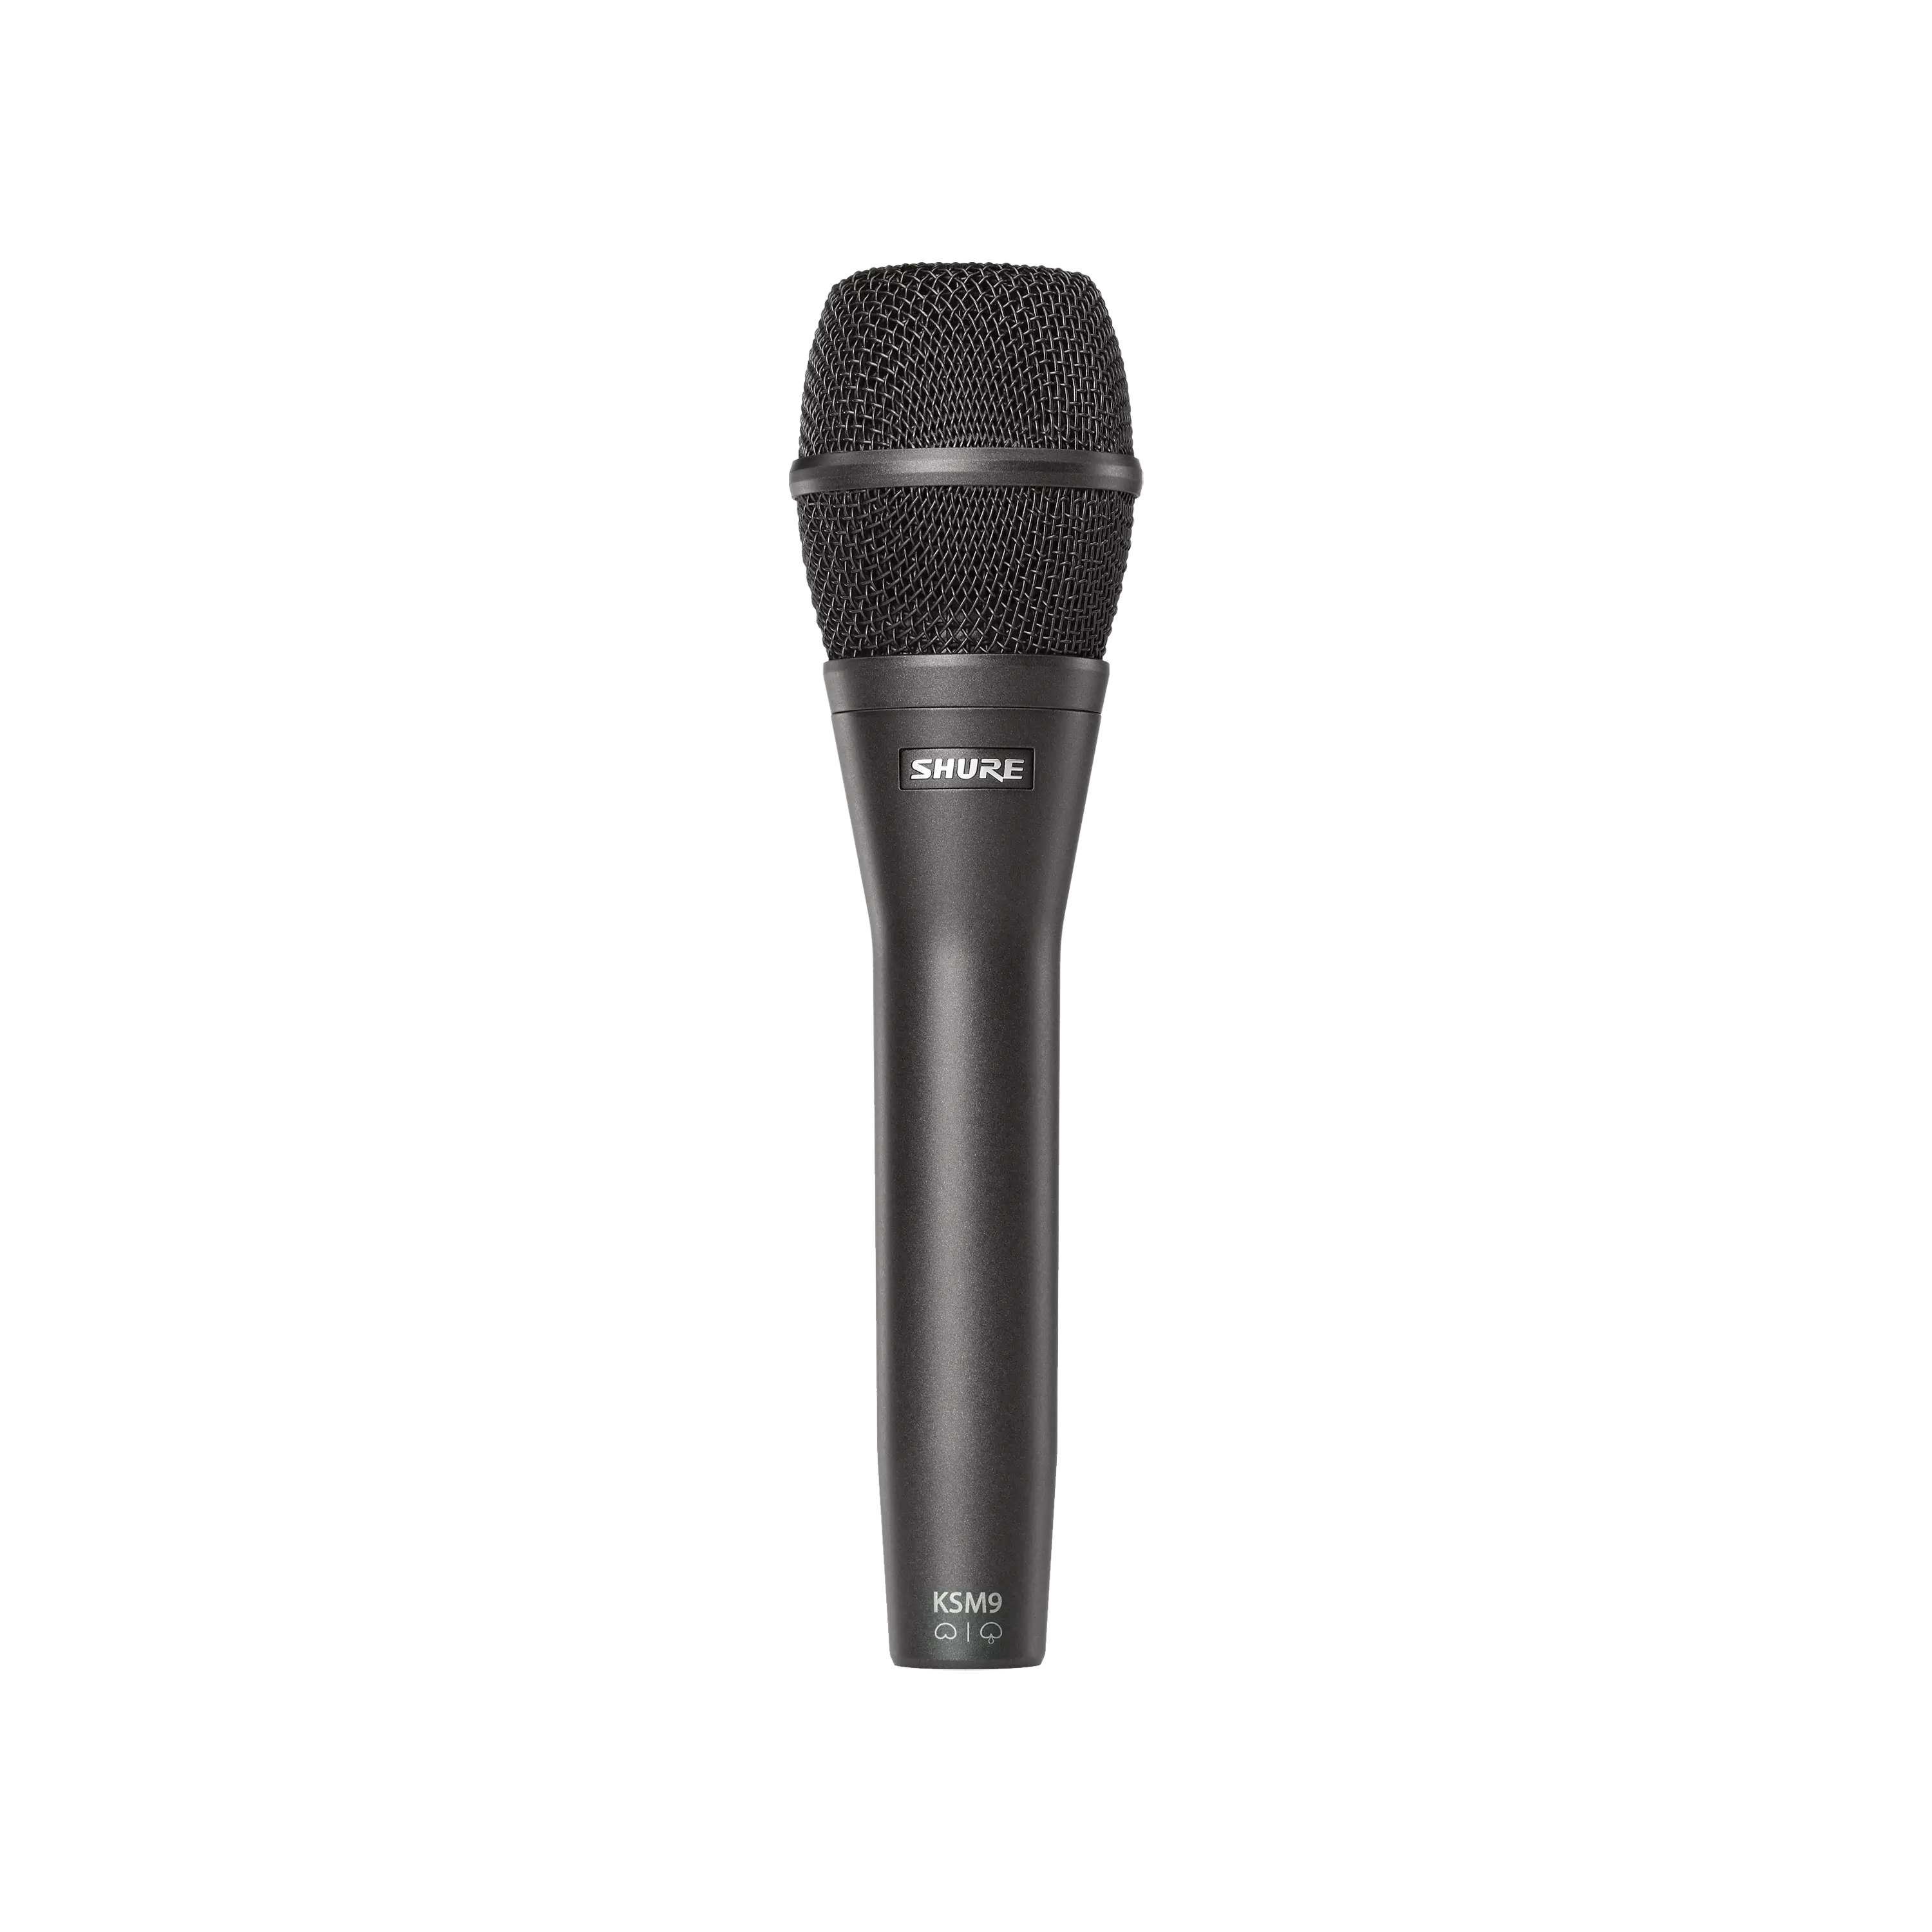 Shure KSM9C Condenser Vocal Supercardioid Mic - Charcoal Grey